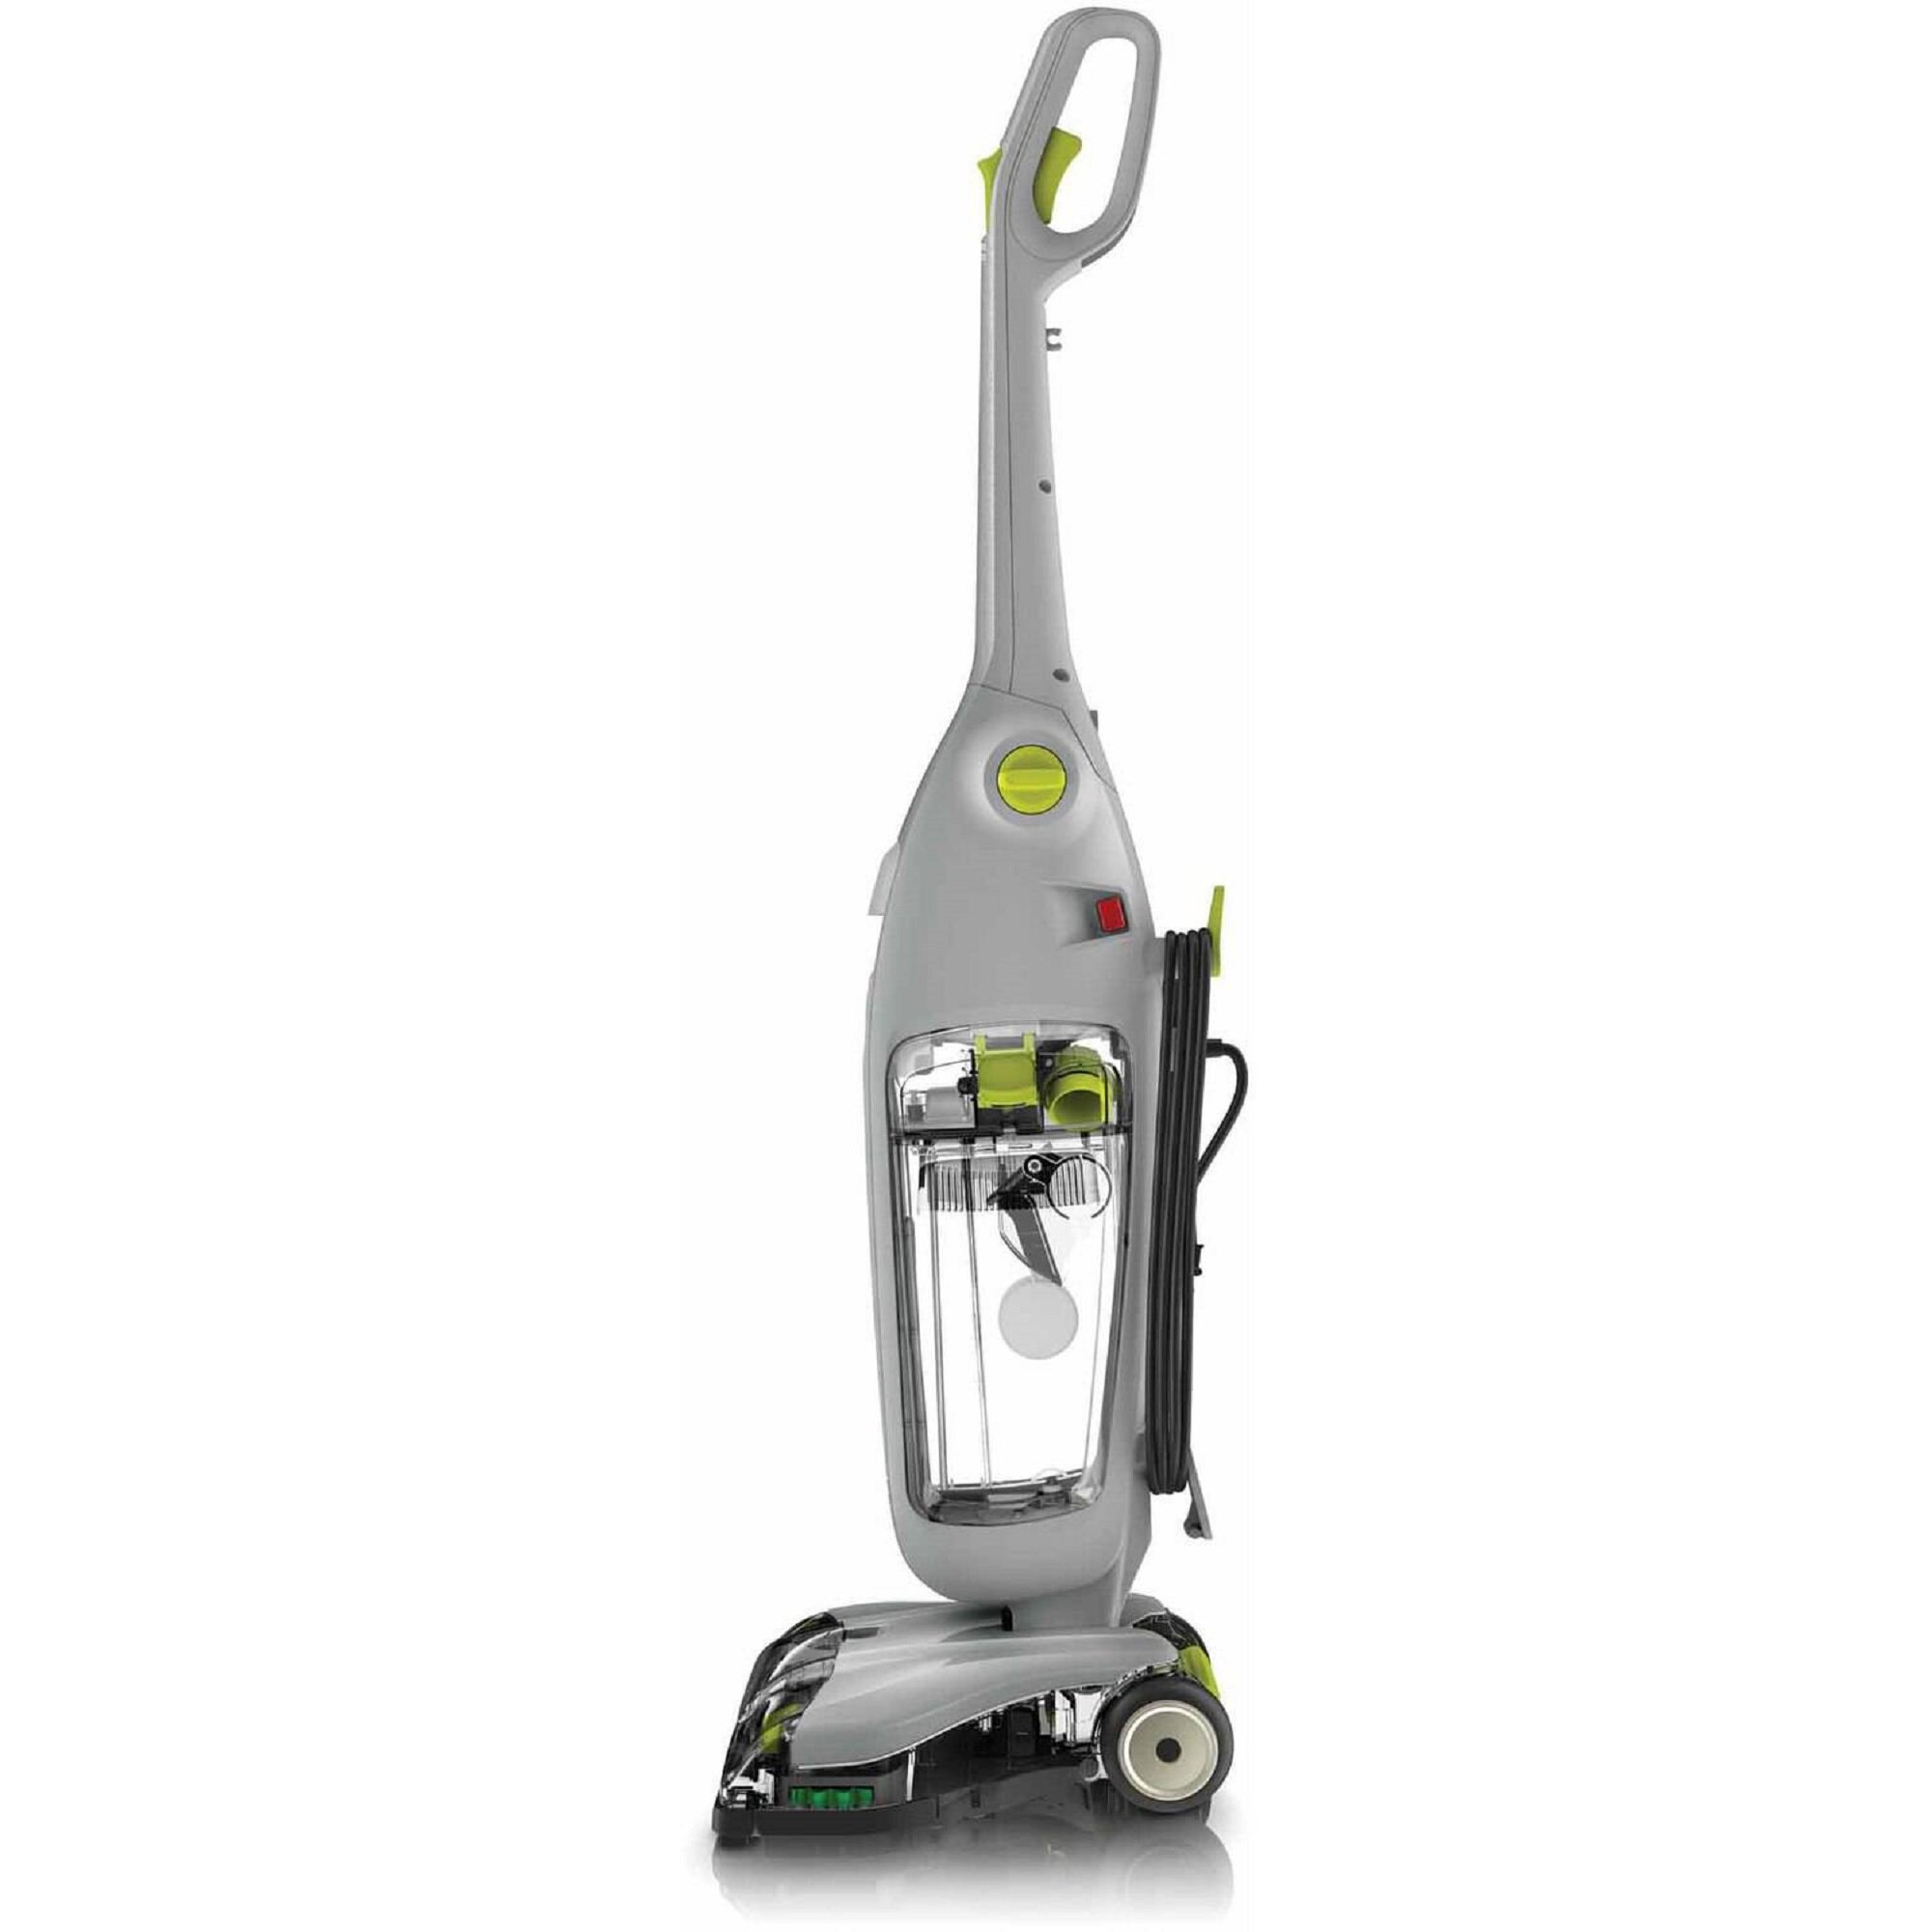 Floormate Deluxe Hard Floor Cleaner Review: Cleaning Perfection for Your Hard  Floors! 